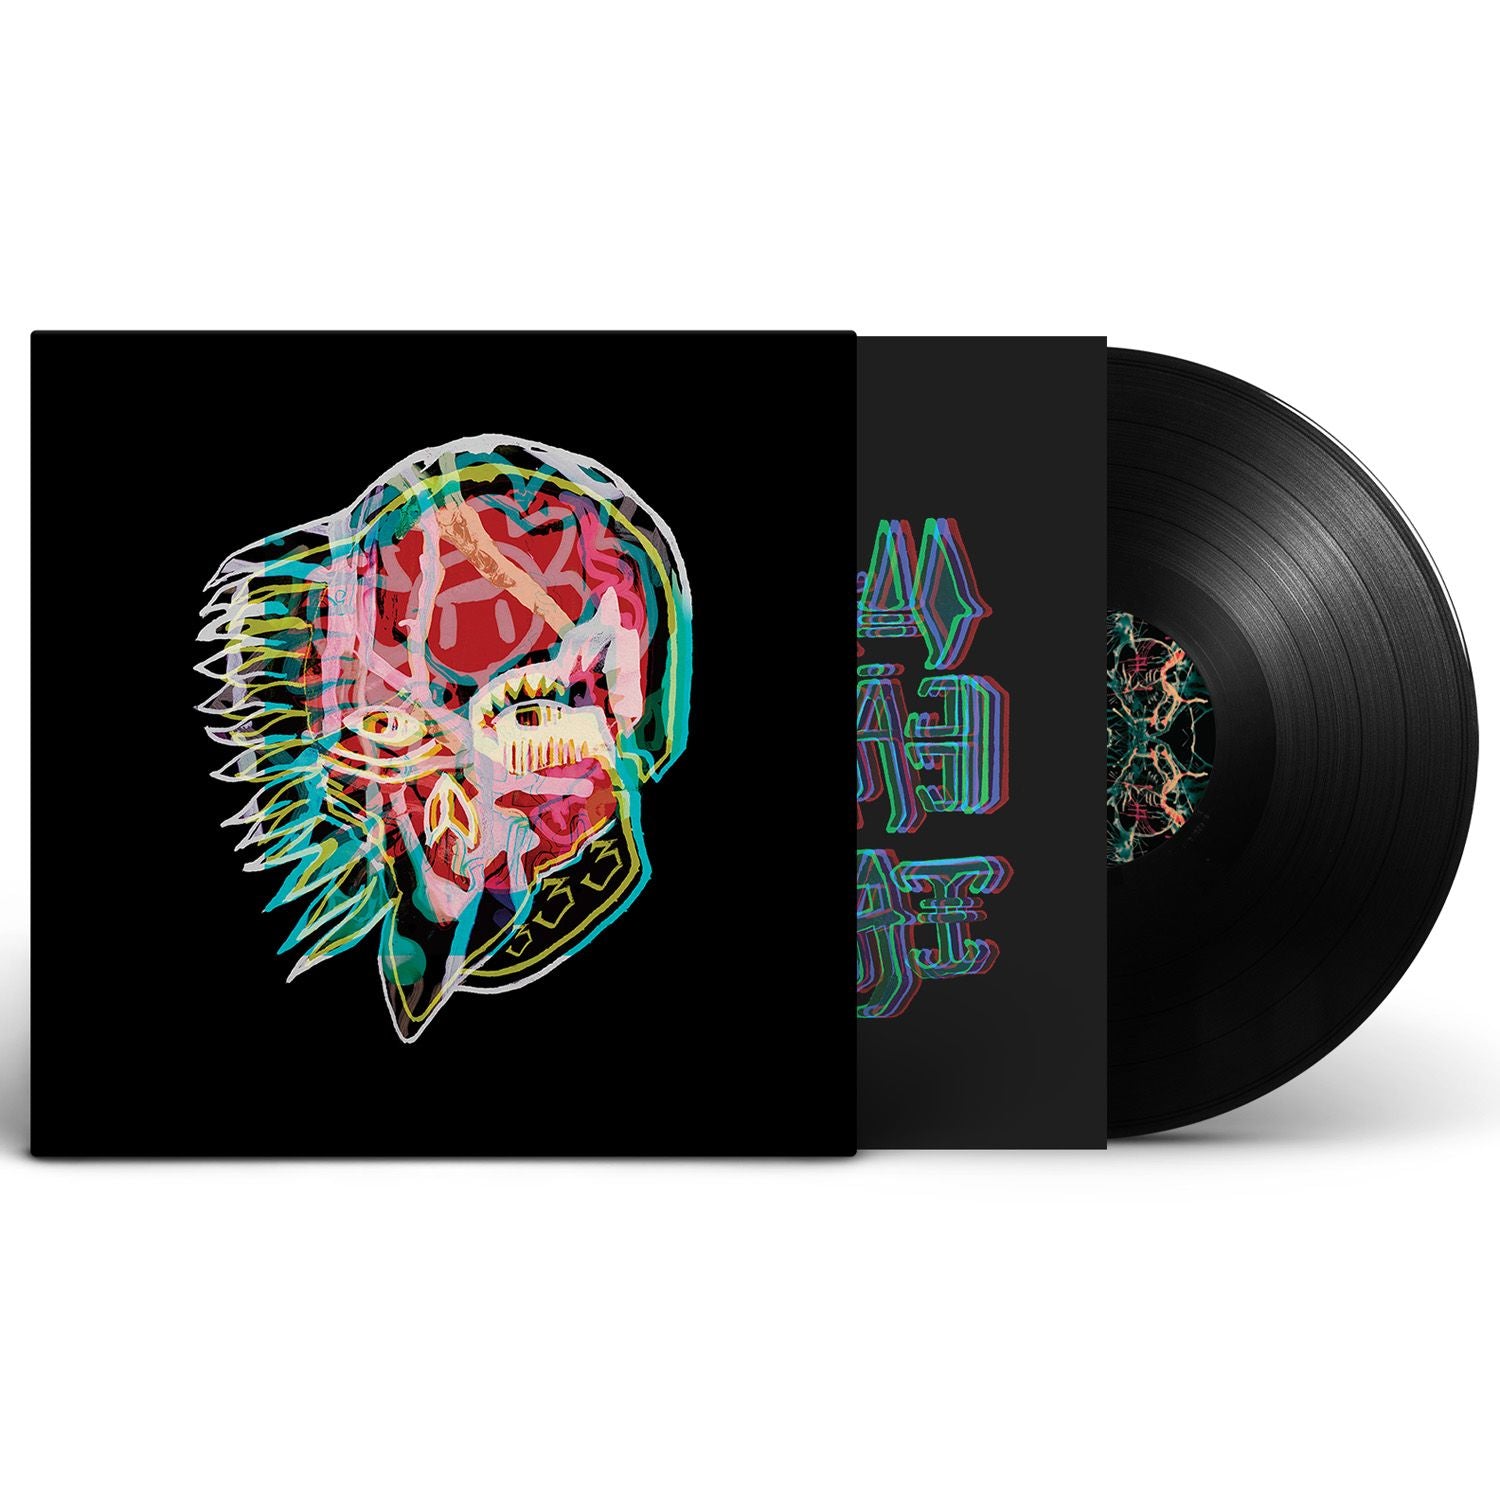 All Them Witches - Nothing as the Ideal [Standard Black Vinyl]